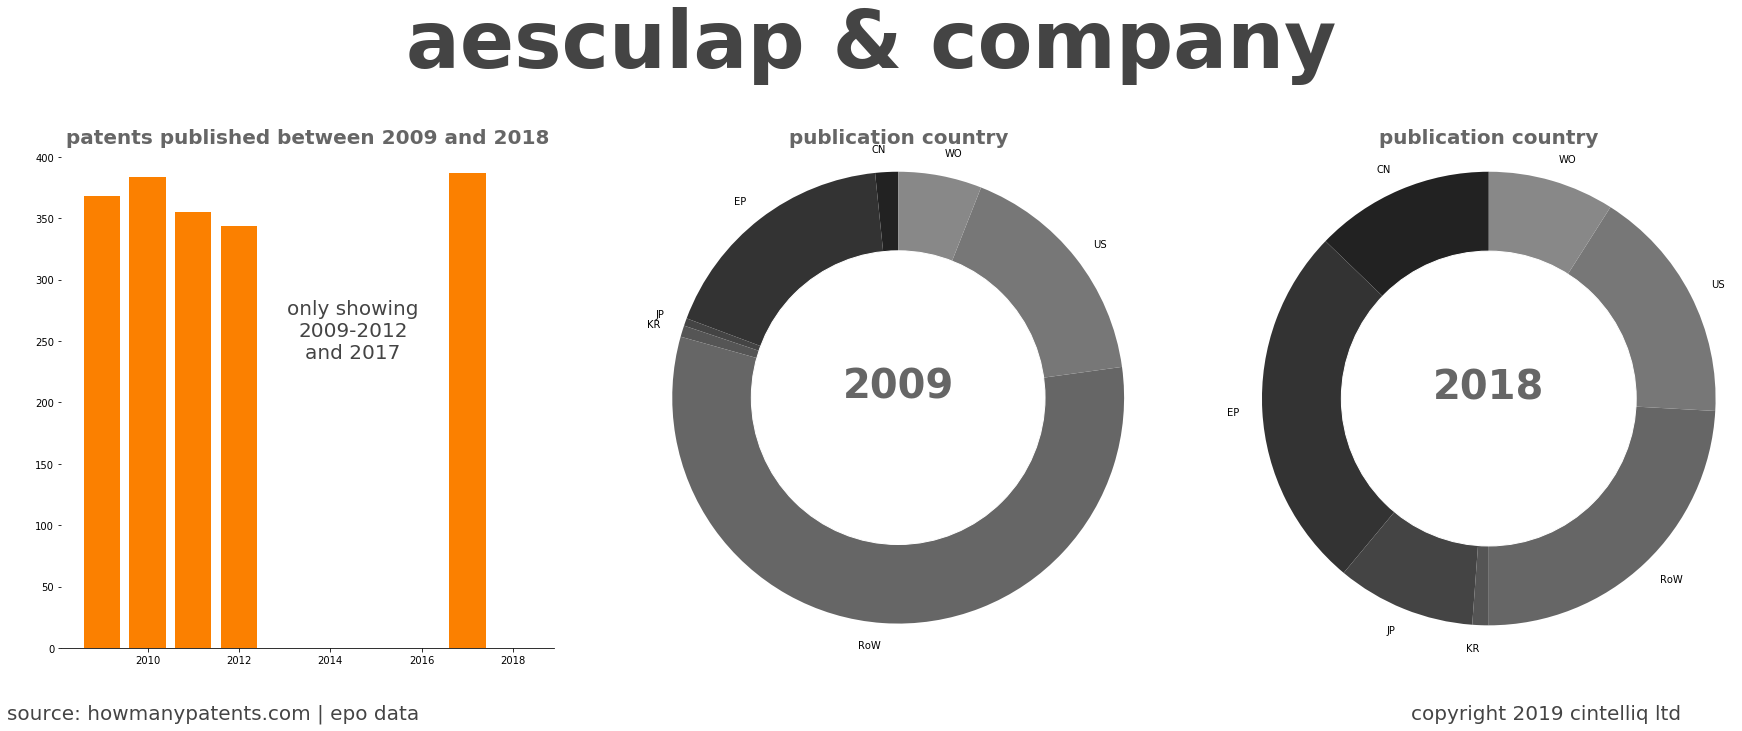 summary of patents for Aesculap & Company